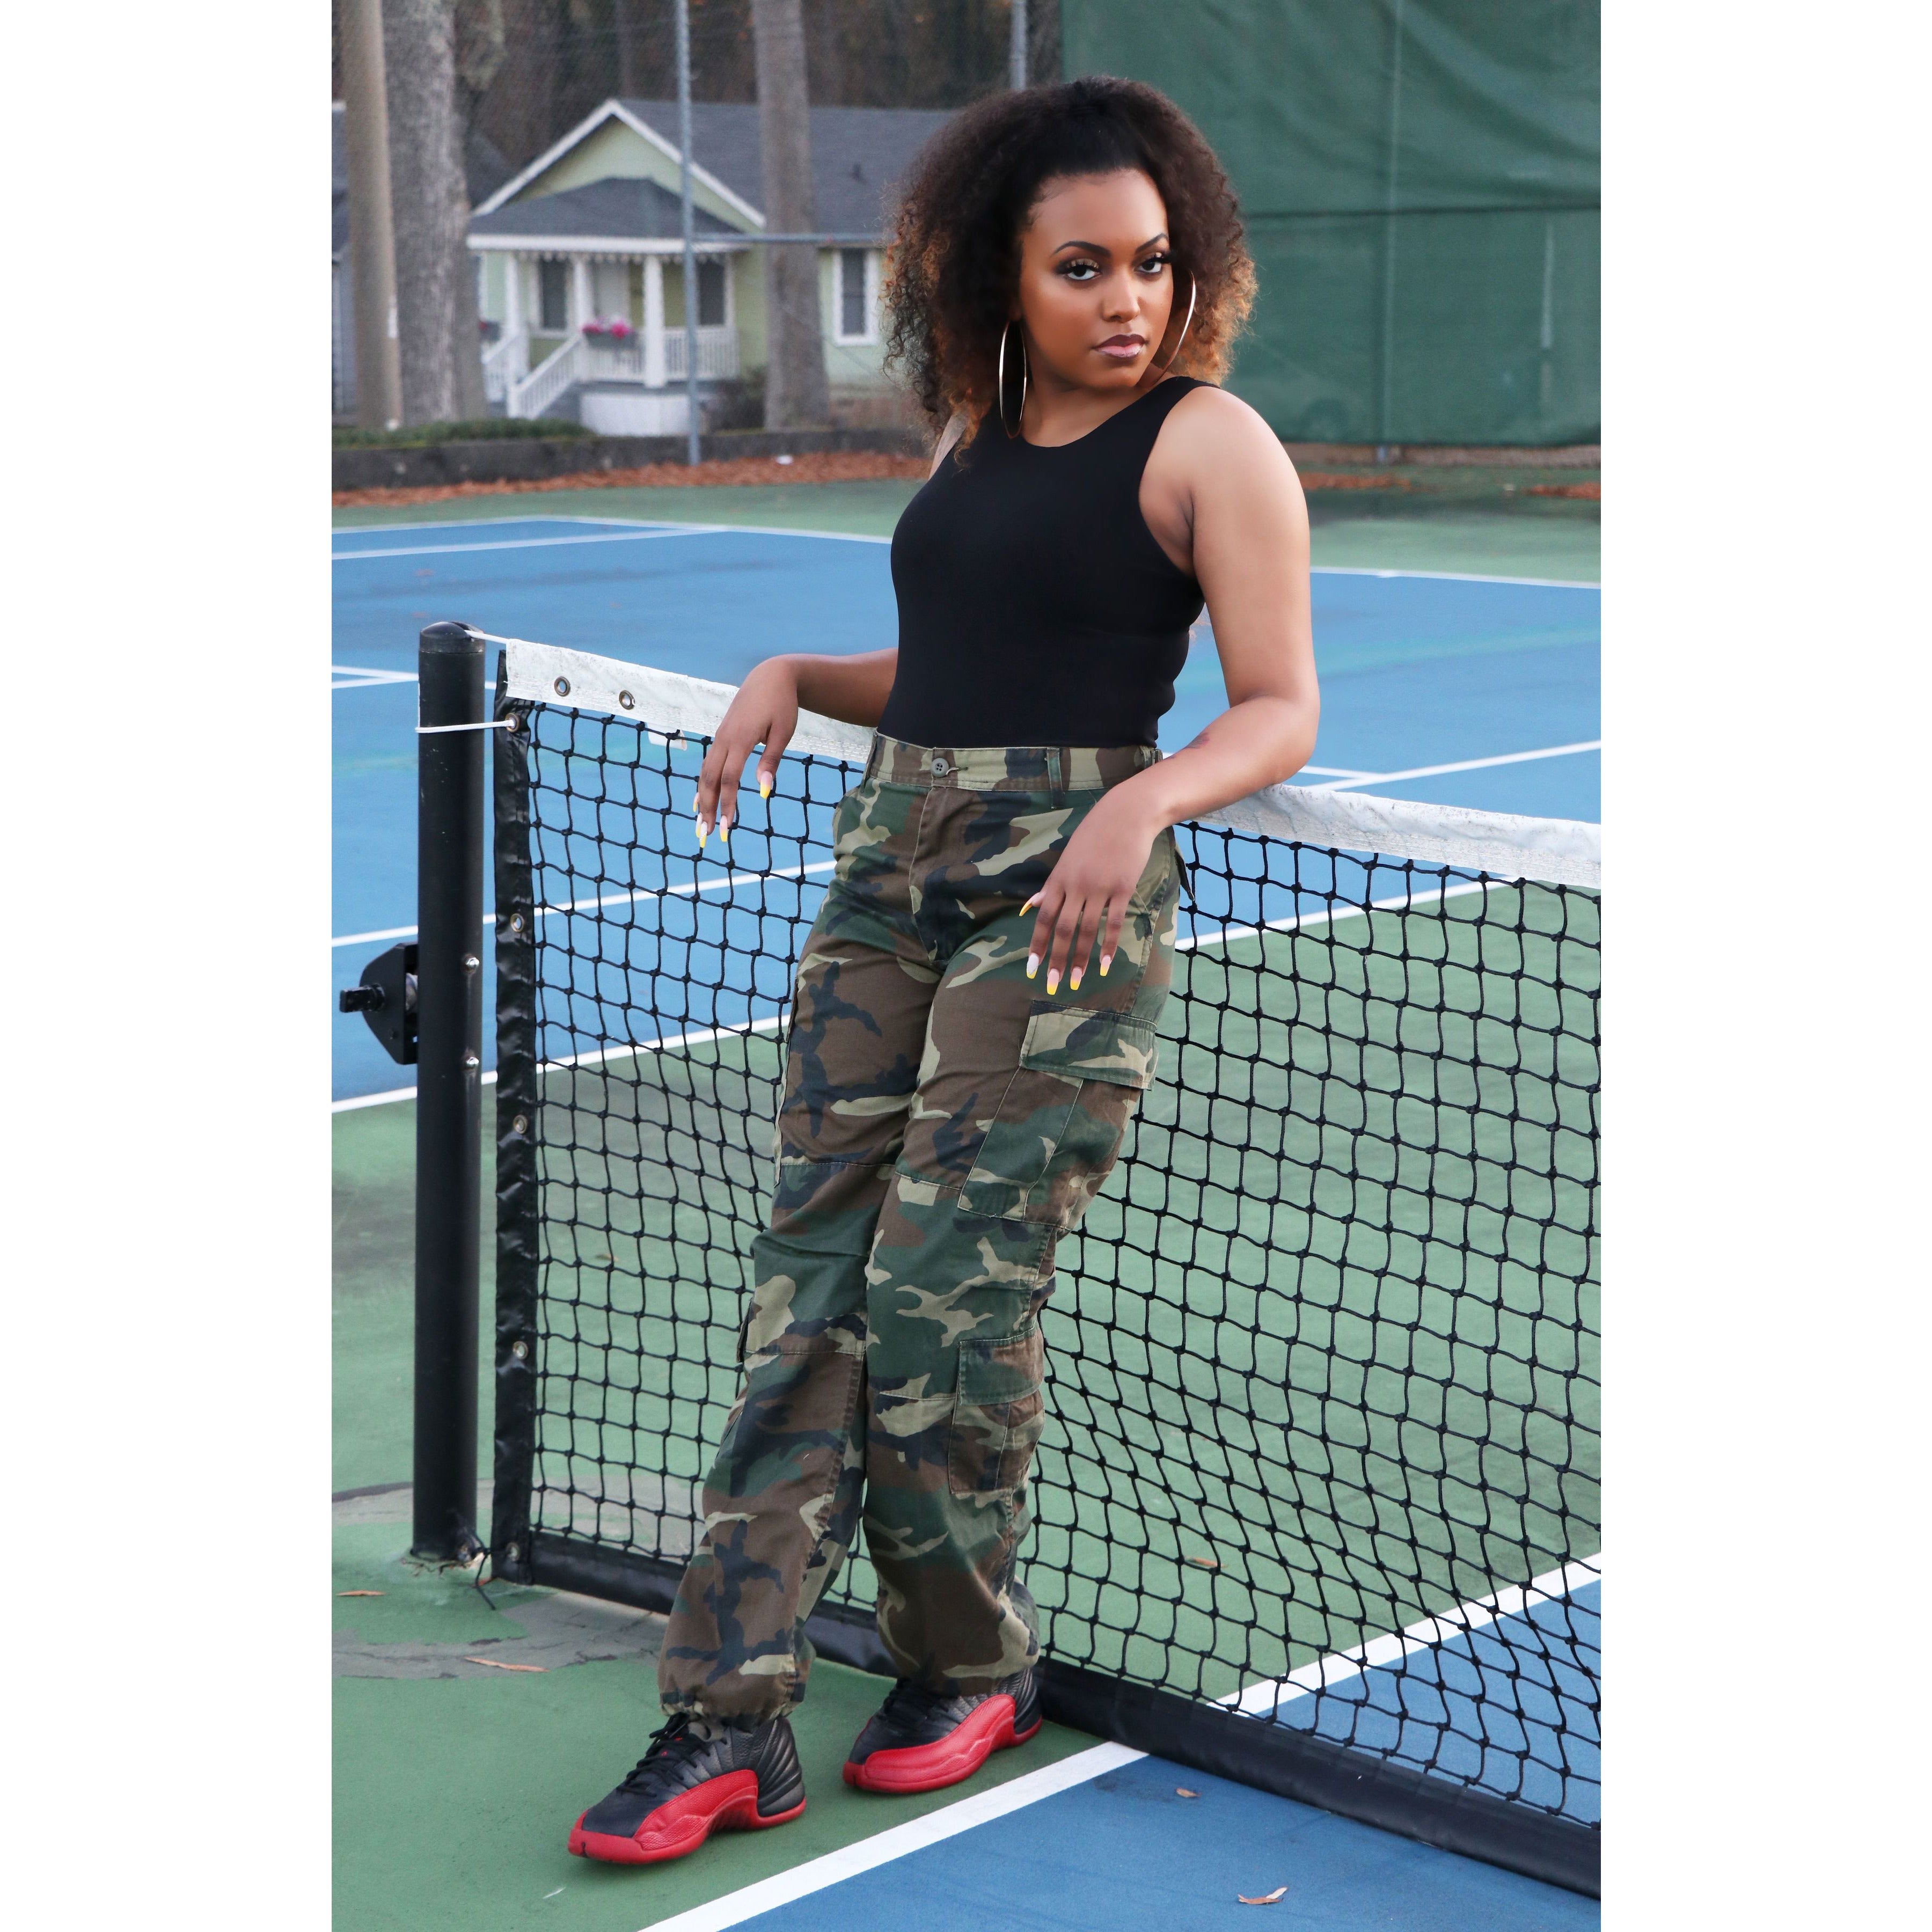 Unisex Camo Fatigue Cargo Pants (Built for style and function)